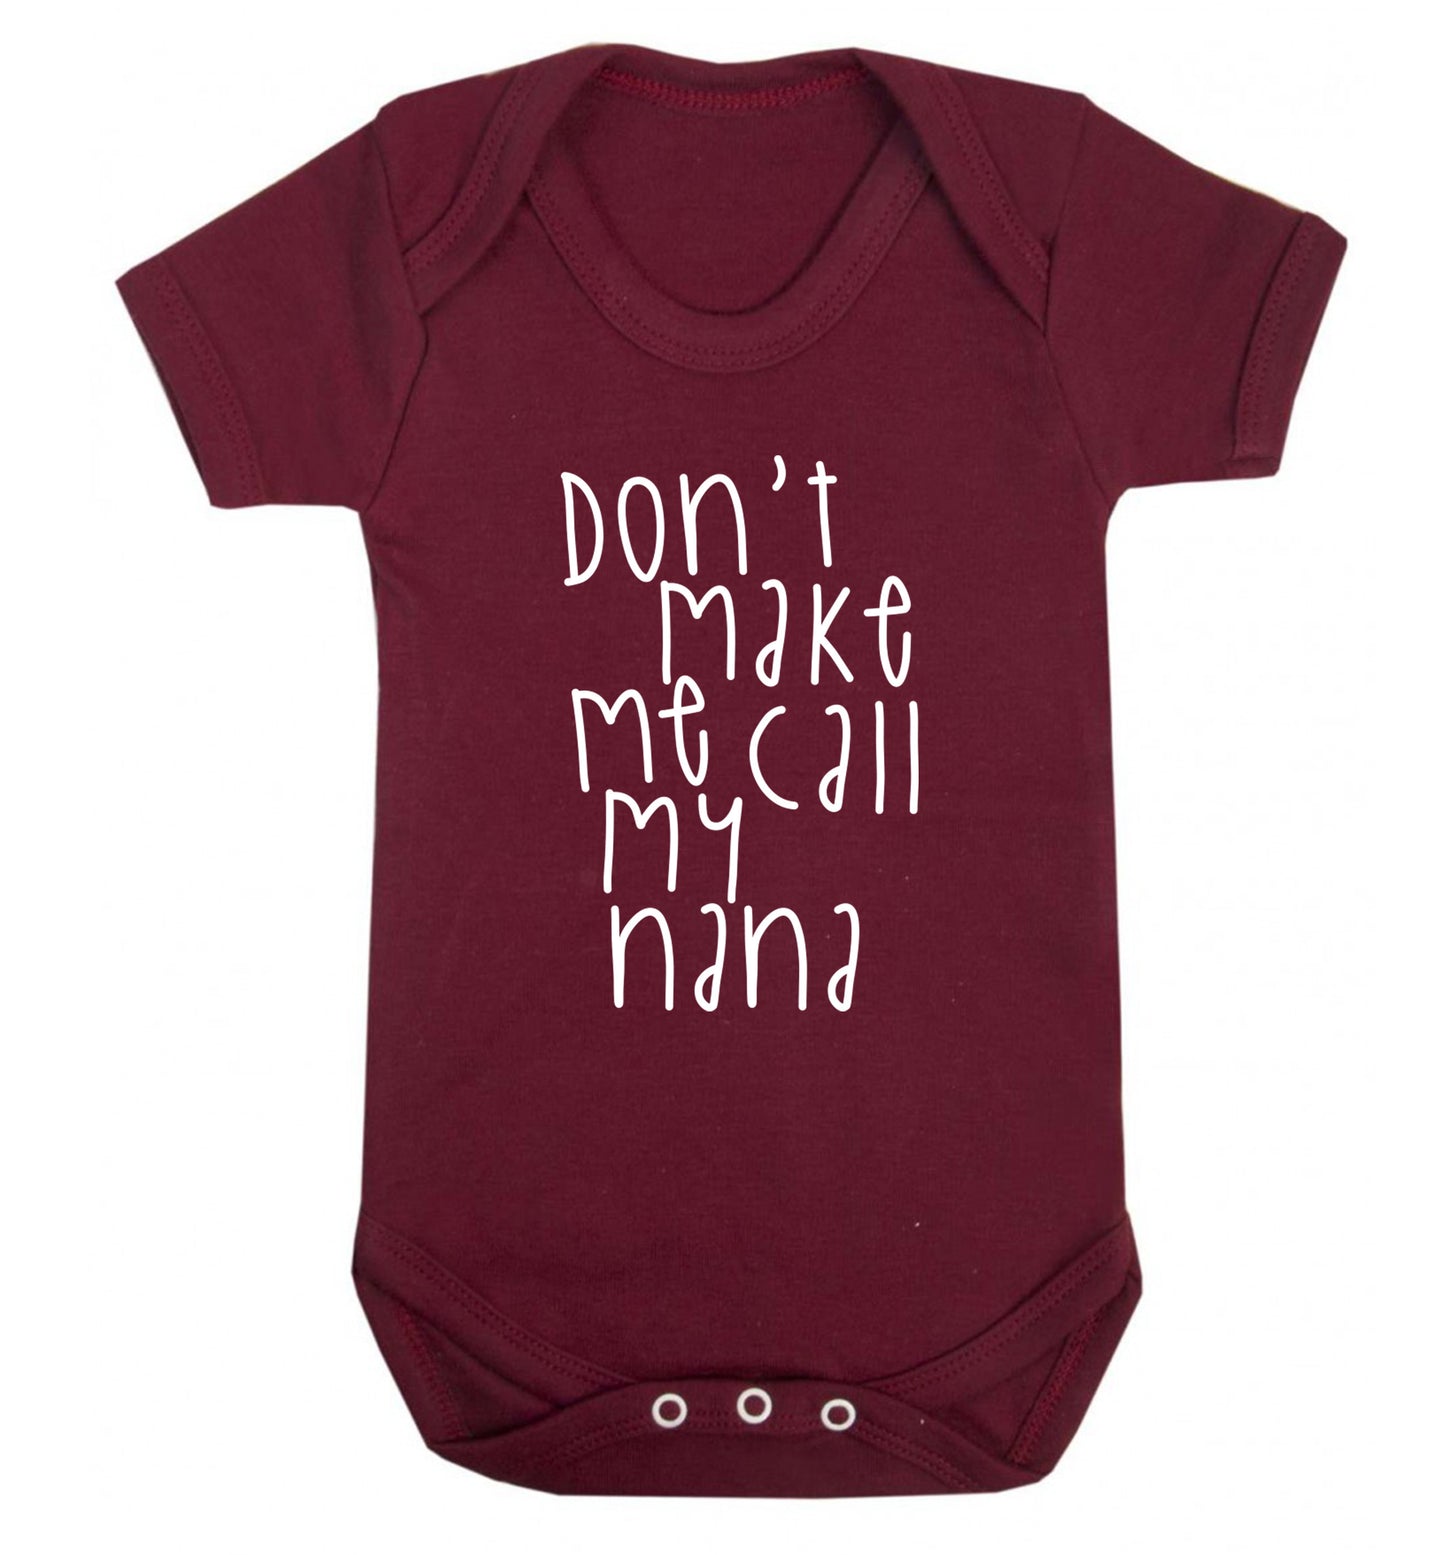 Don't make me call my nana Baby Vest maroon 18-24 months